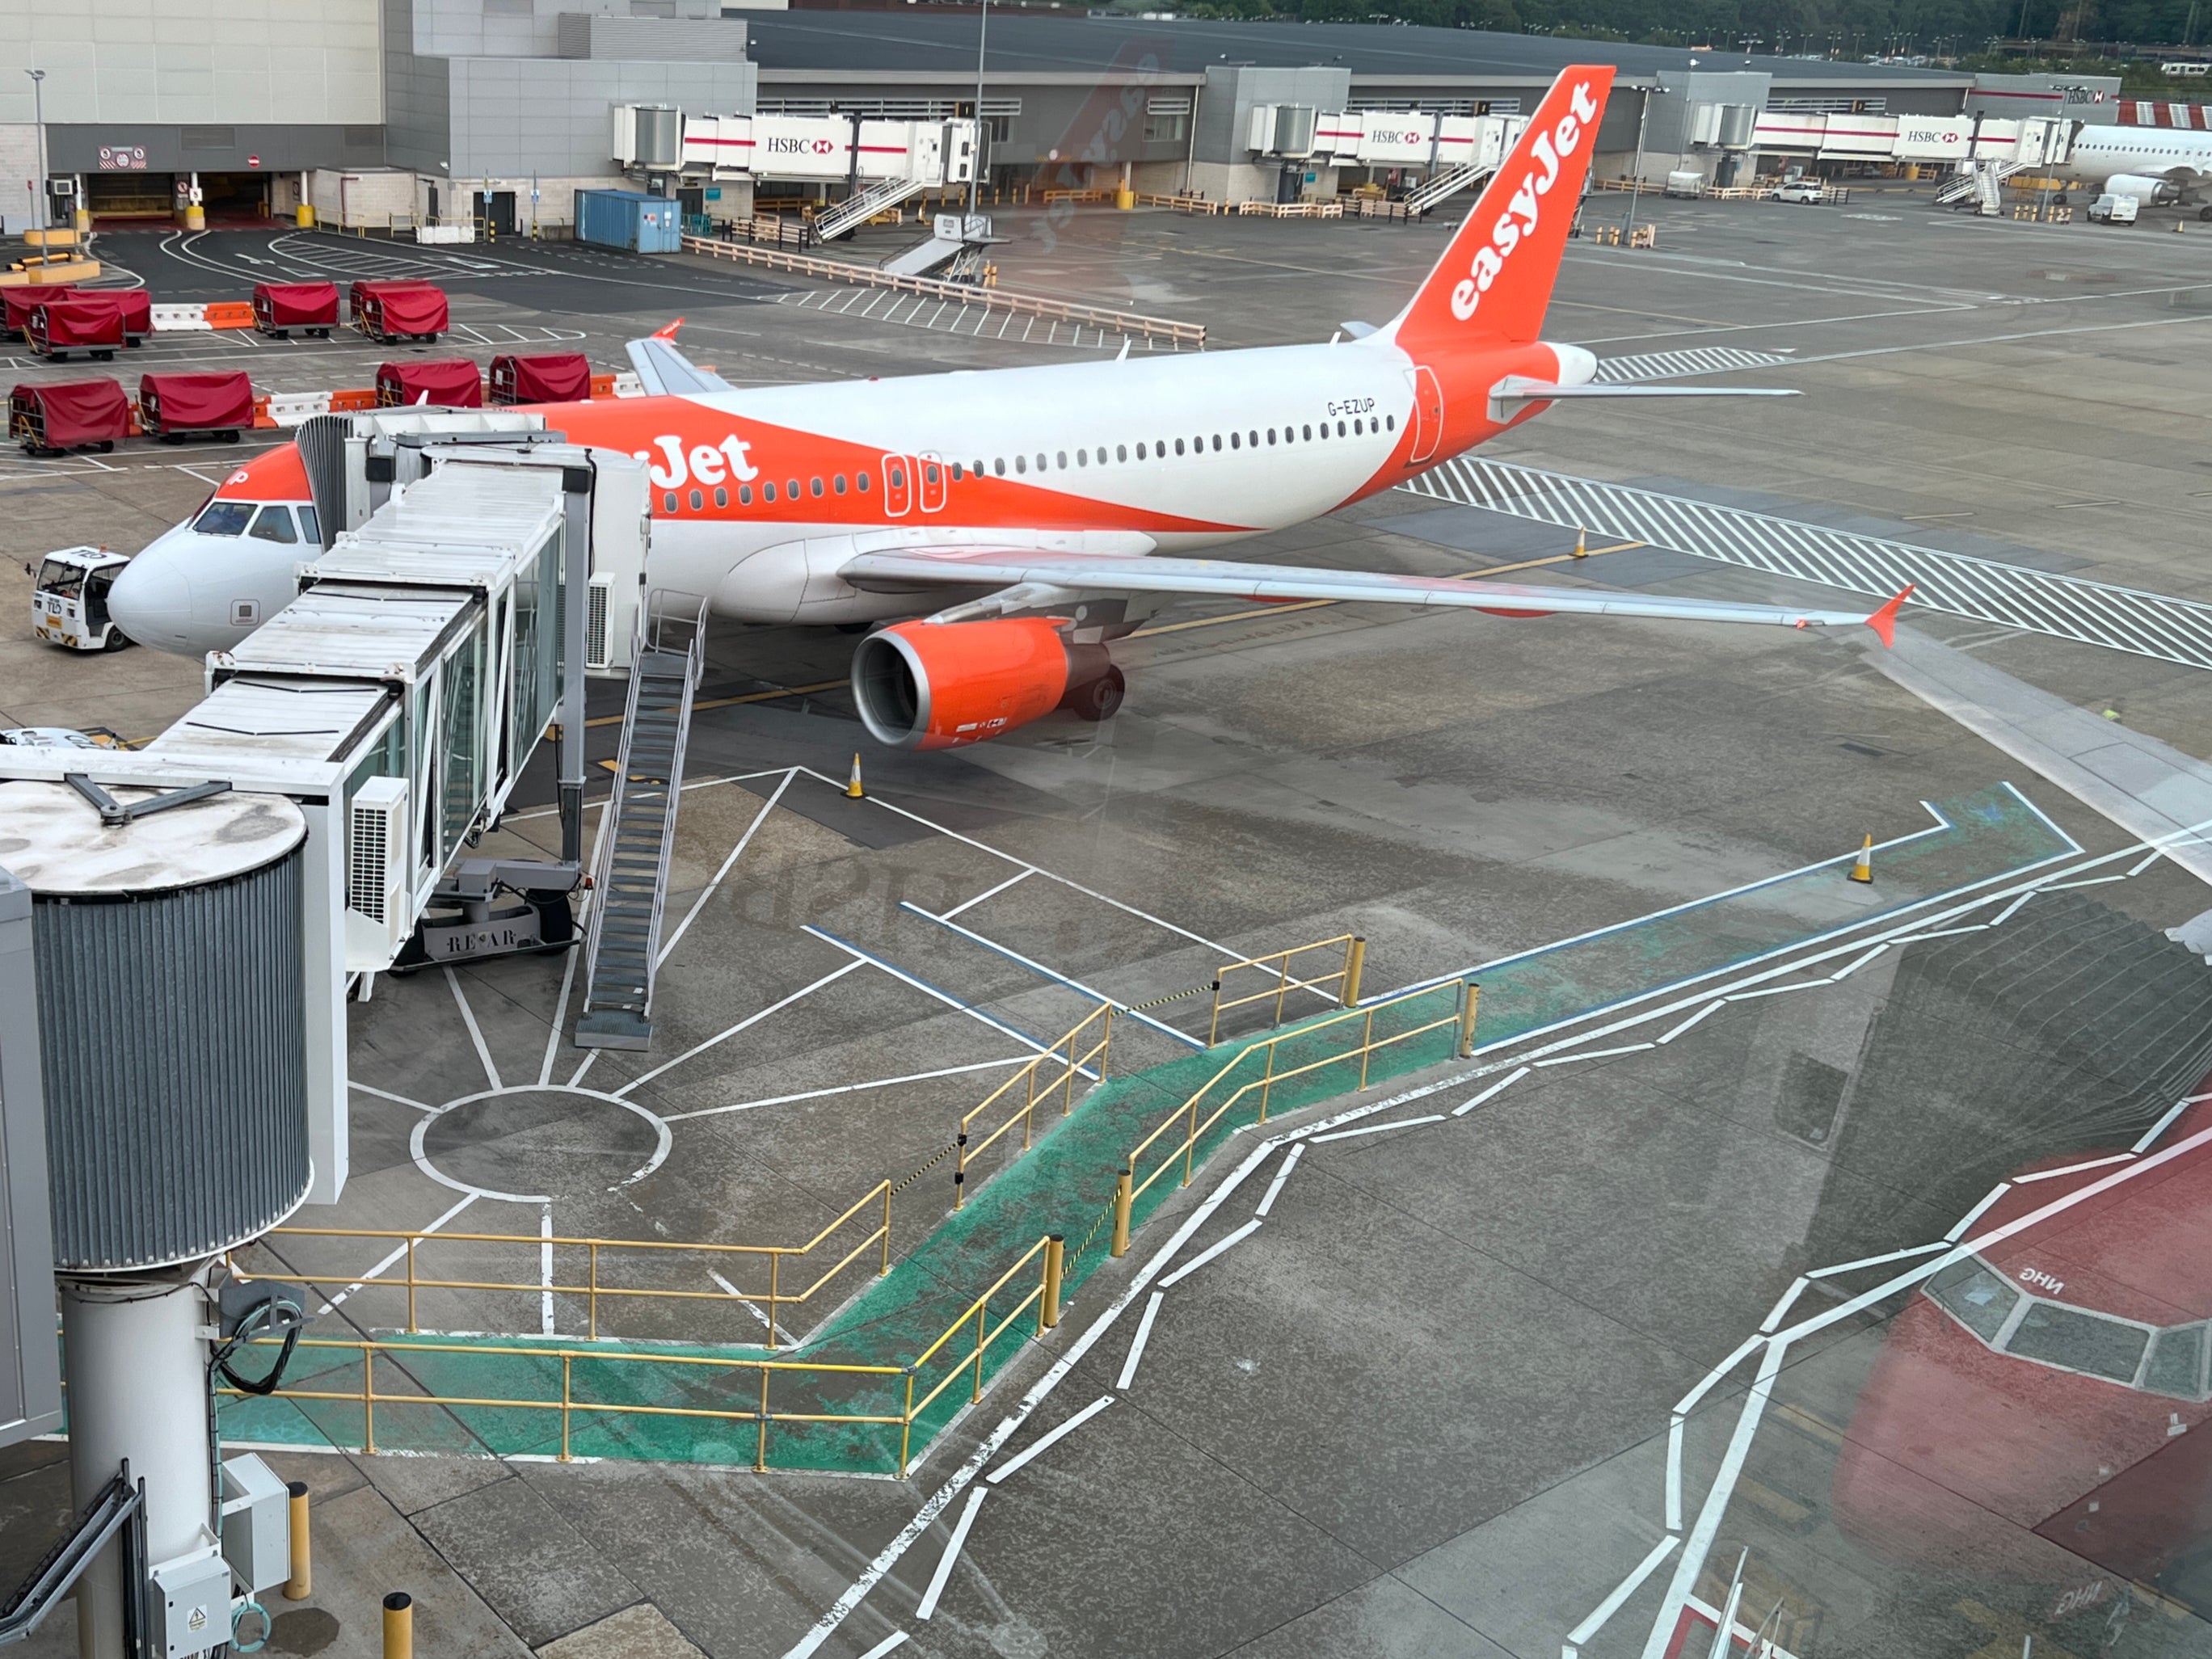 Going places? easyJet aircraft at London Gatwick airport